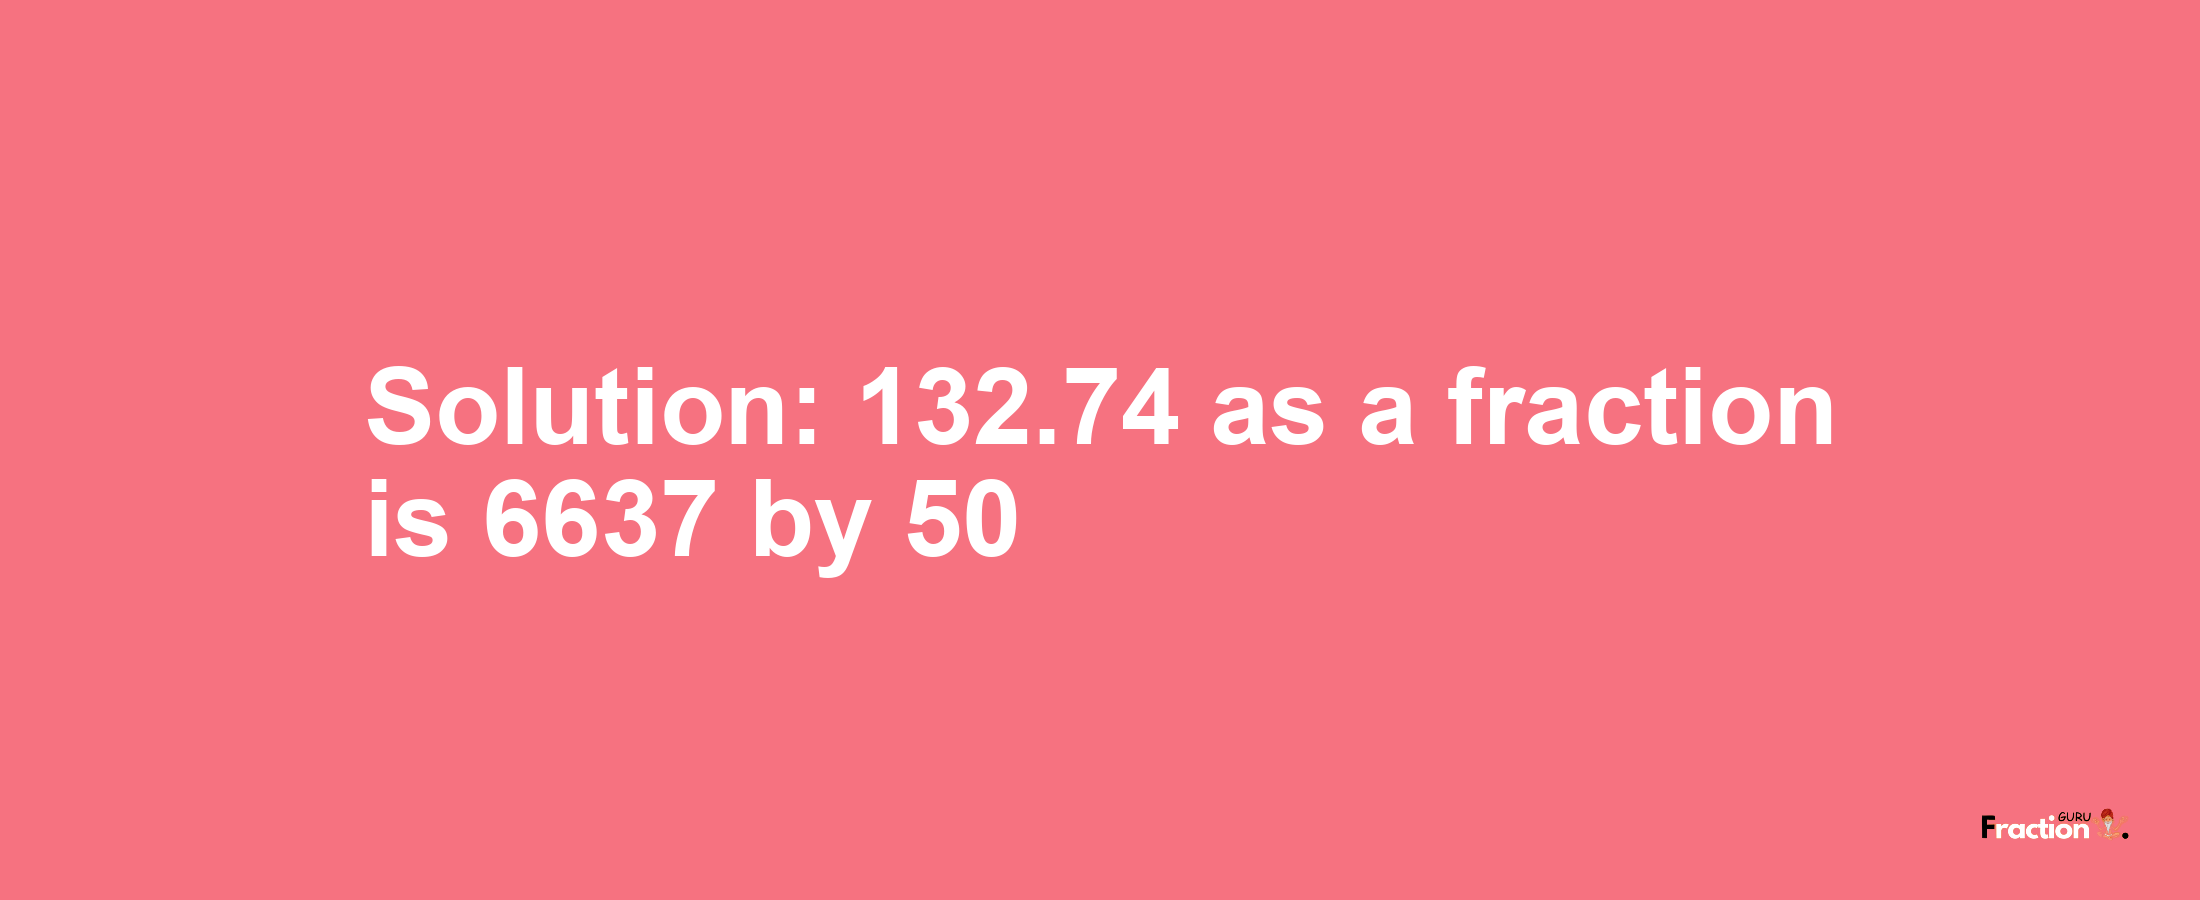 Solution:132.74 as a fraction is 6637/50